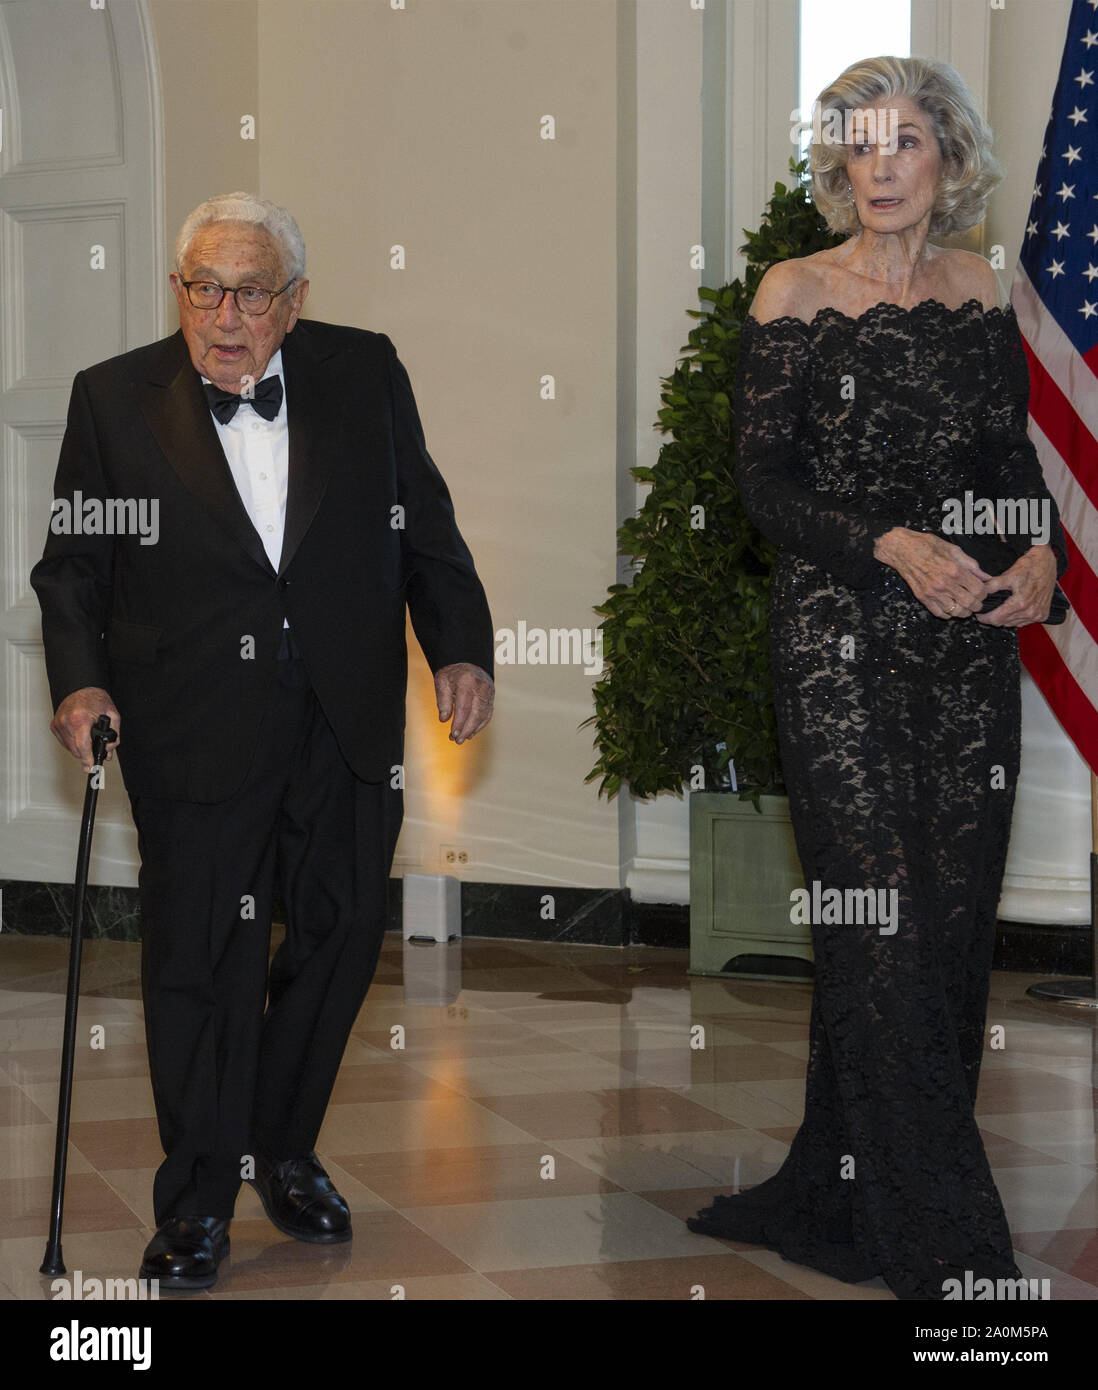 Washington, District of Columbia, USA. 20th Sep, 2019. Former United States Secretary of State Henry Kissinger and Nancy Kissinger arrive for the State Dinner hosted by United States President Donald J. Trump and First lady Melania Trump in honor of Prime Minister Scott Morrison of Australia and his wife, Jenny Morrison, at the White House in Washington, DC on Friday, September 20, 2019 Credit: Ron Sachs/CNP/ZUMA Wire/Alamy Live News Stock Photo